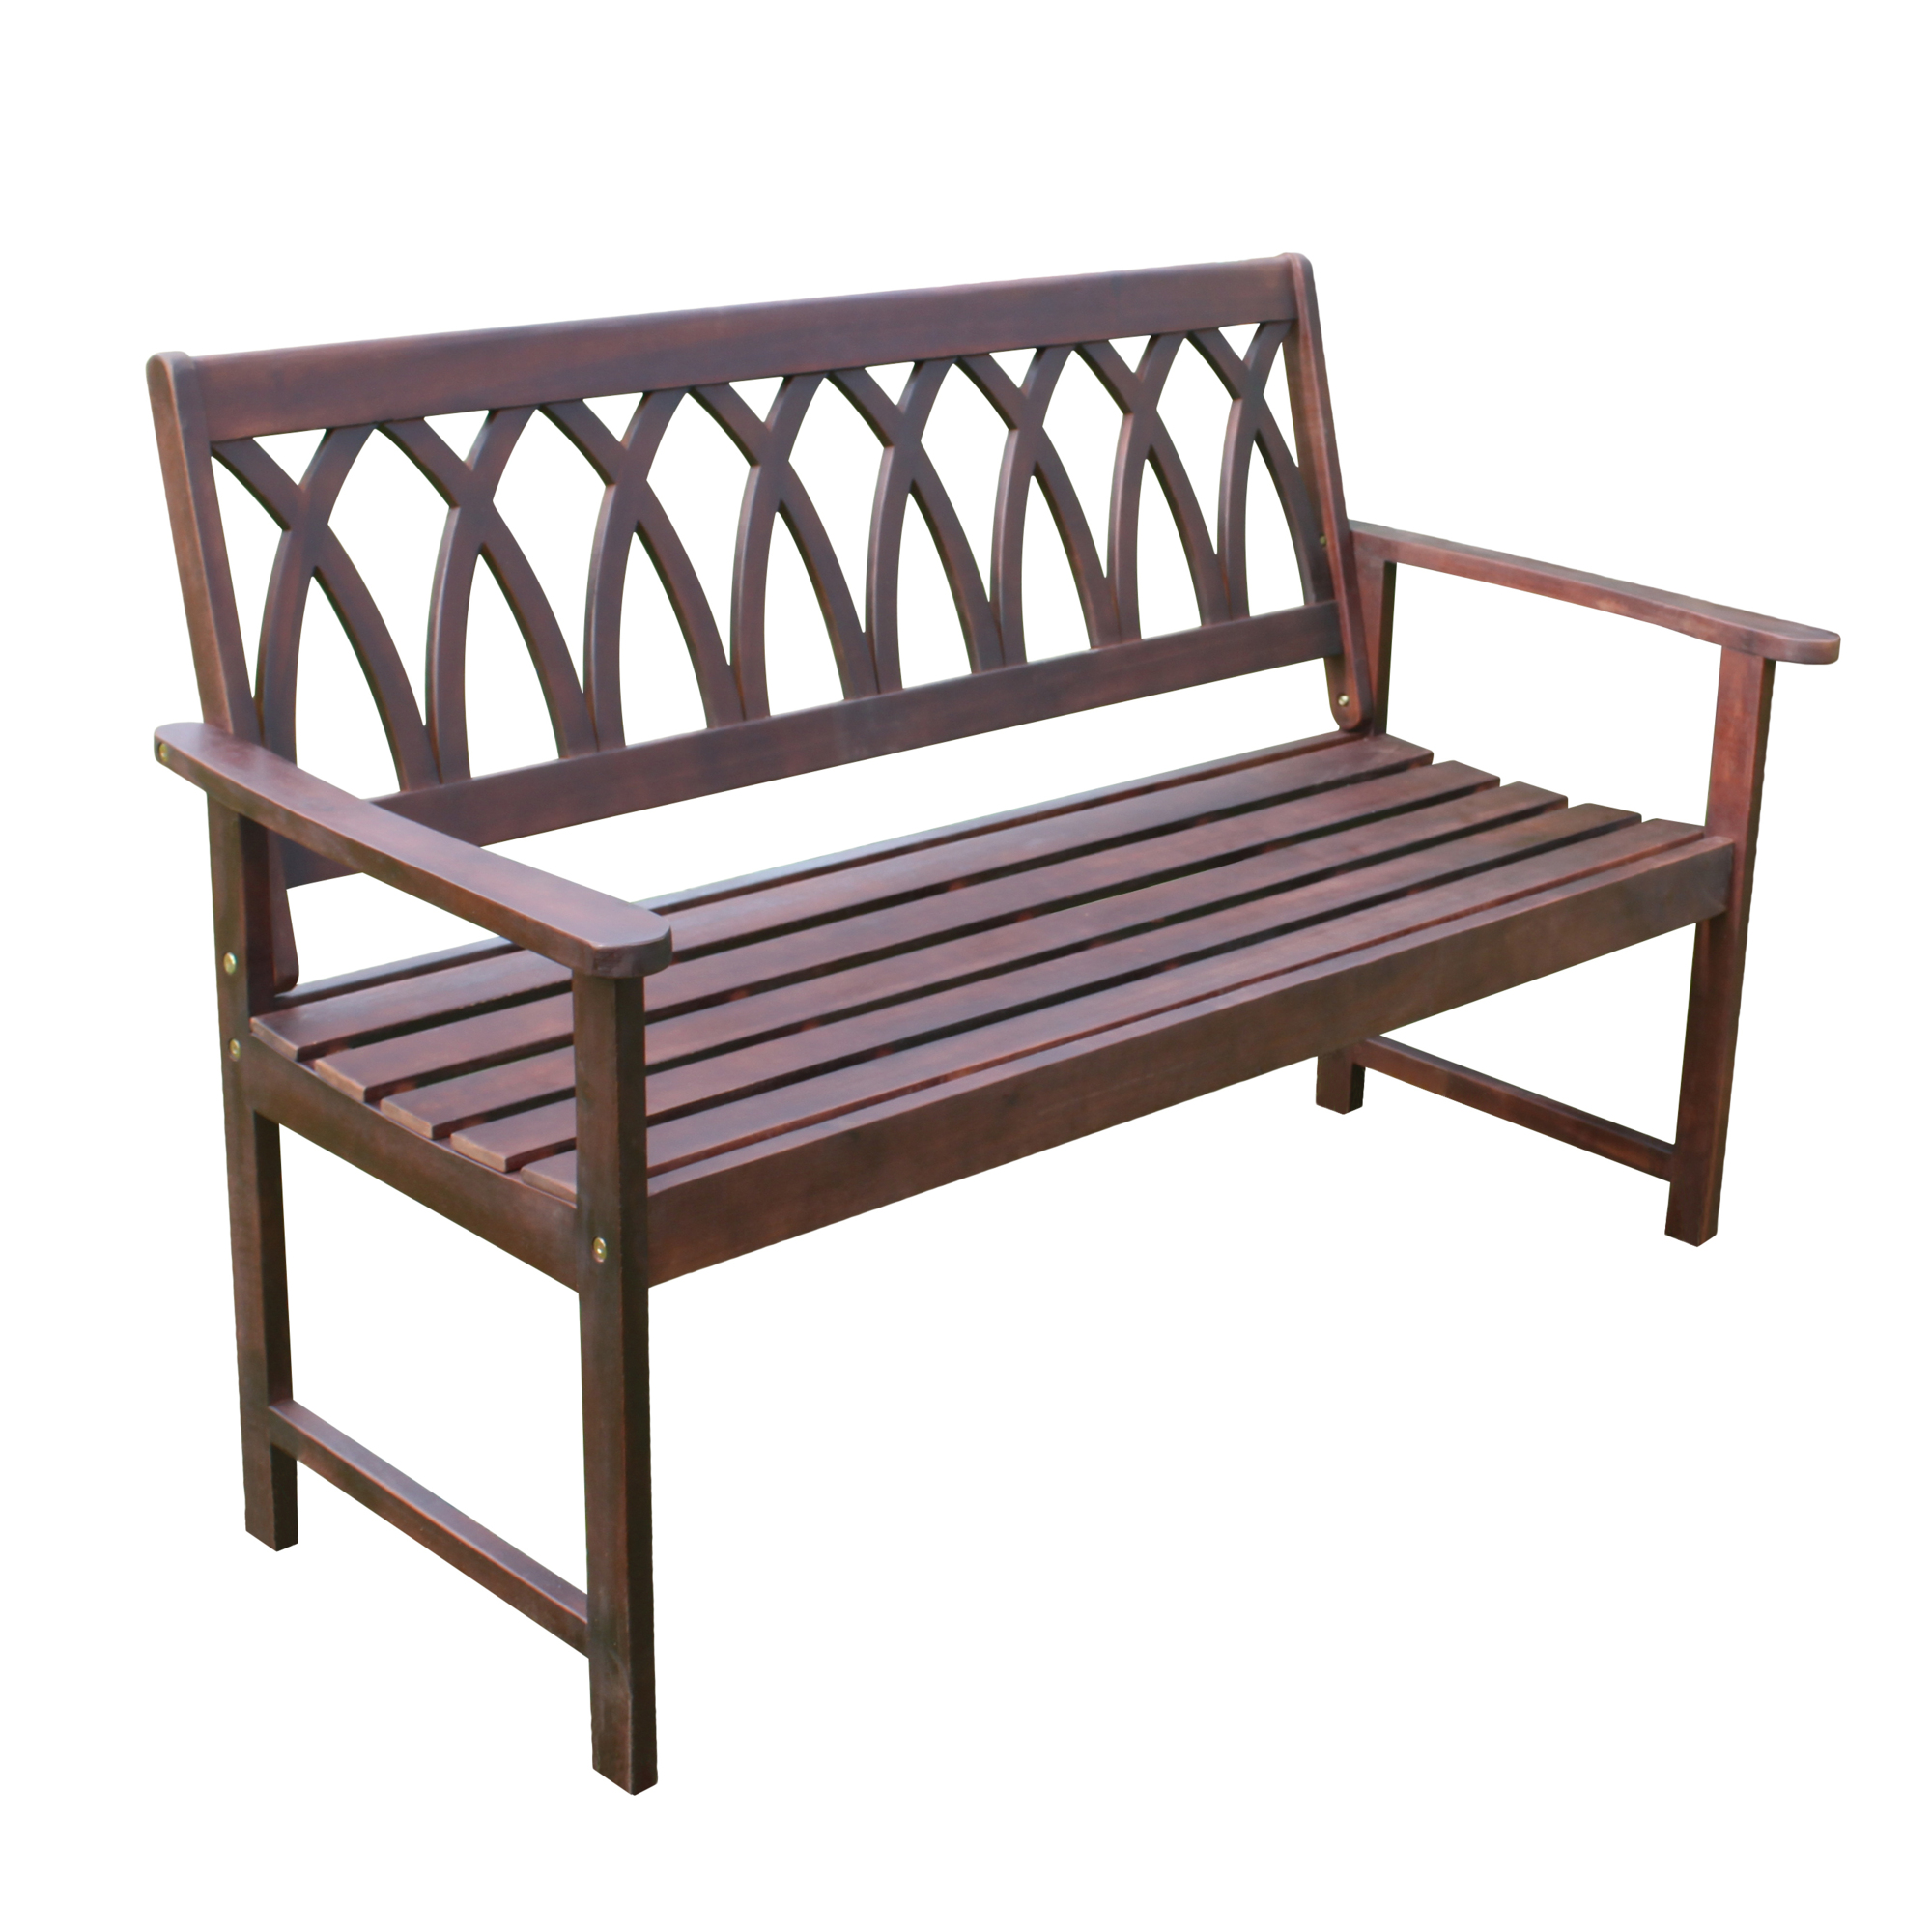 Merry Products, Criss Cross Garden Bench, Primary Color Natural, Material Wood, Width 50 in, Model BCH0330610810